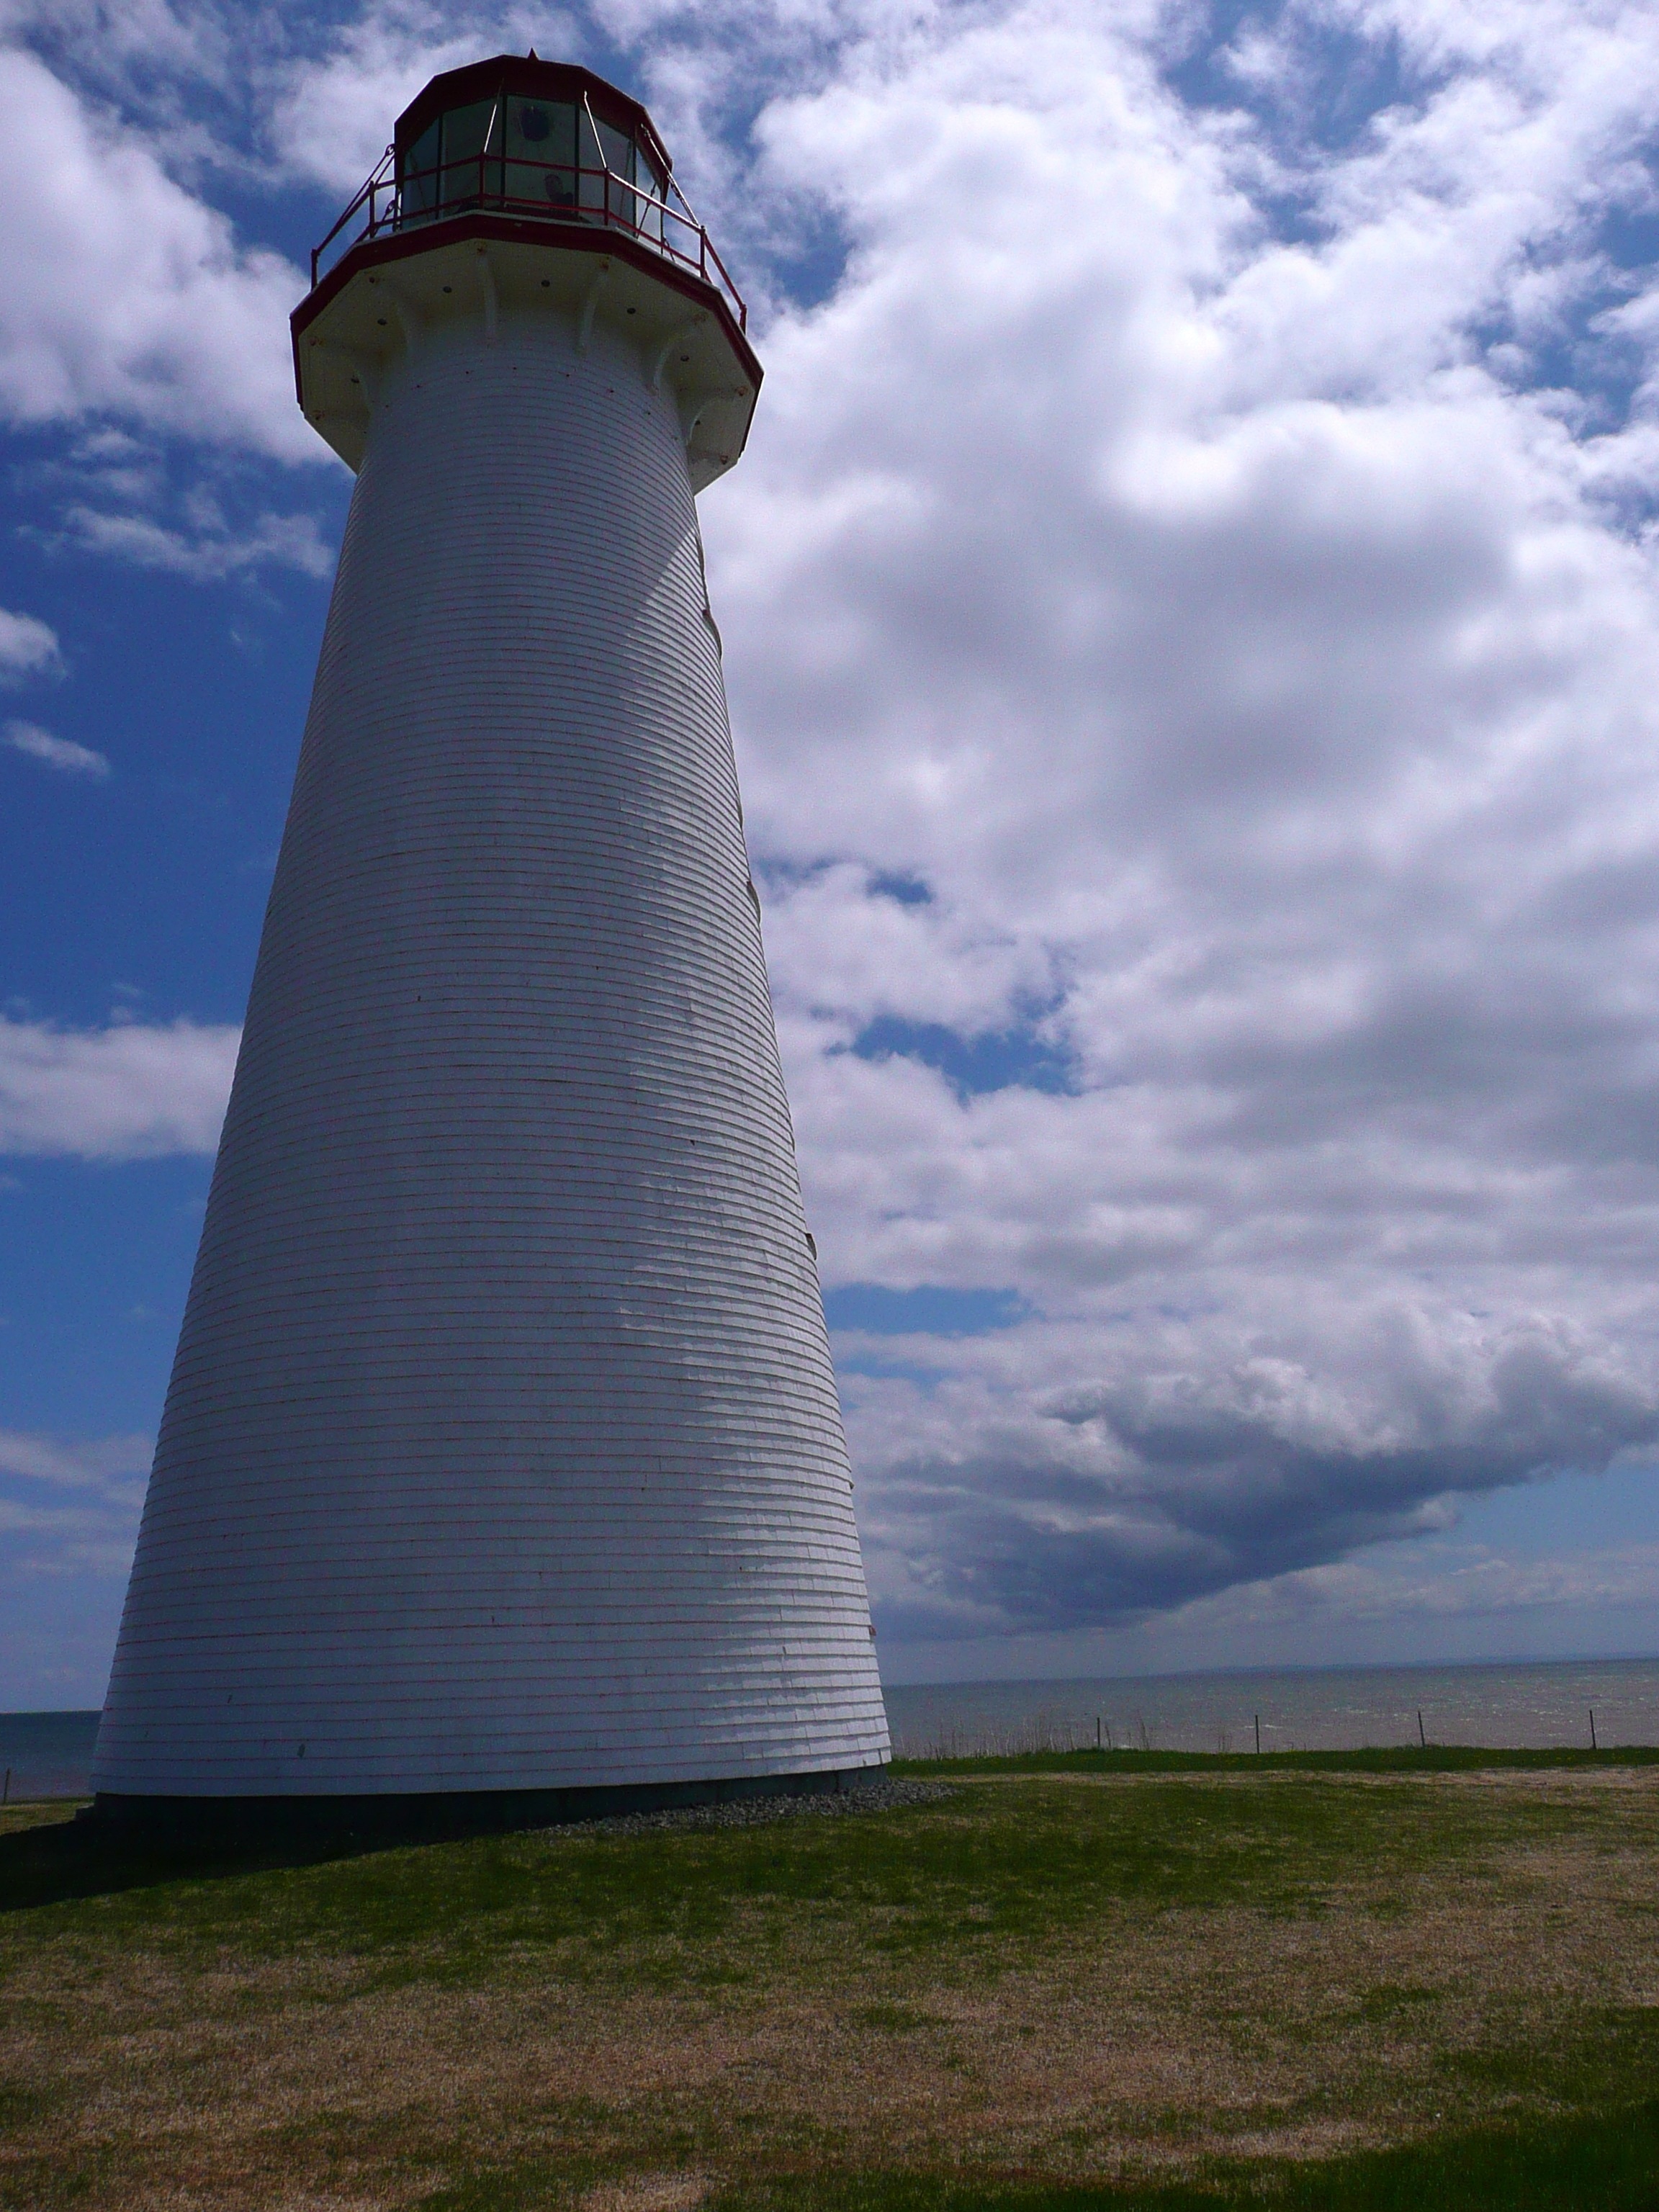 white lighthouse tower